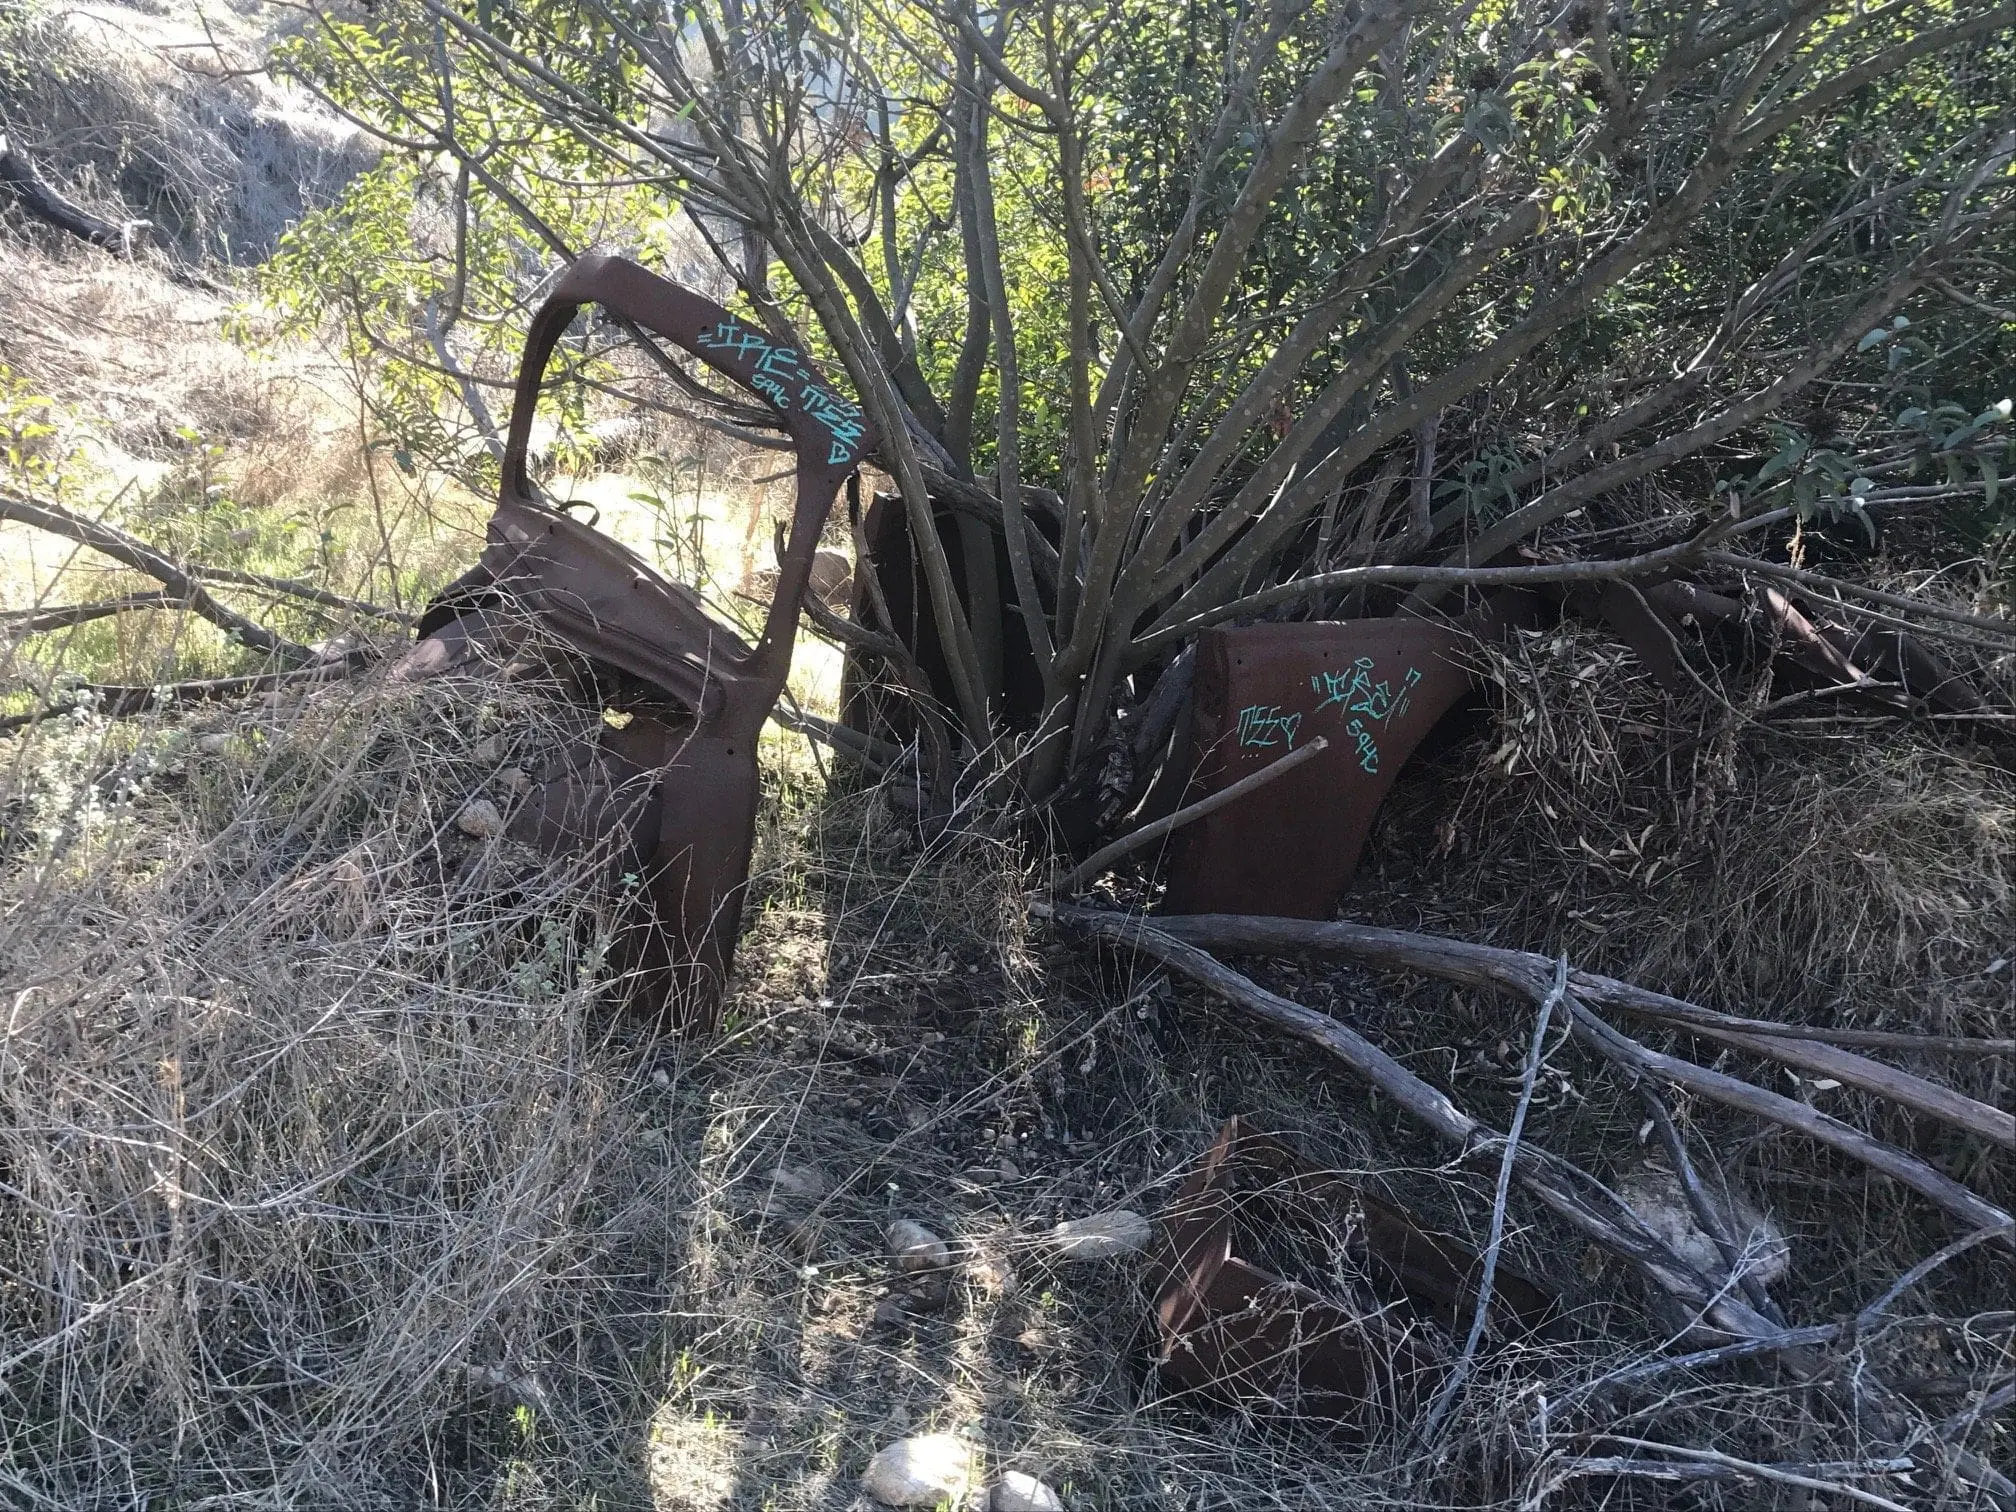 Turnbull Canyon Trail rusted car